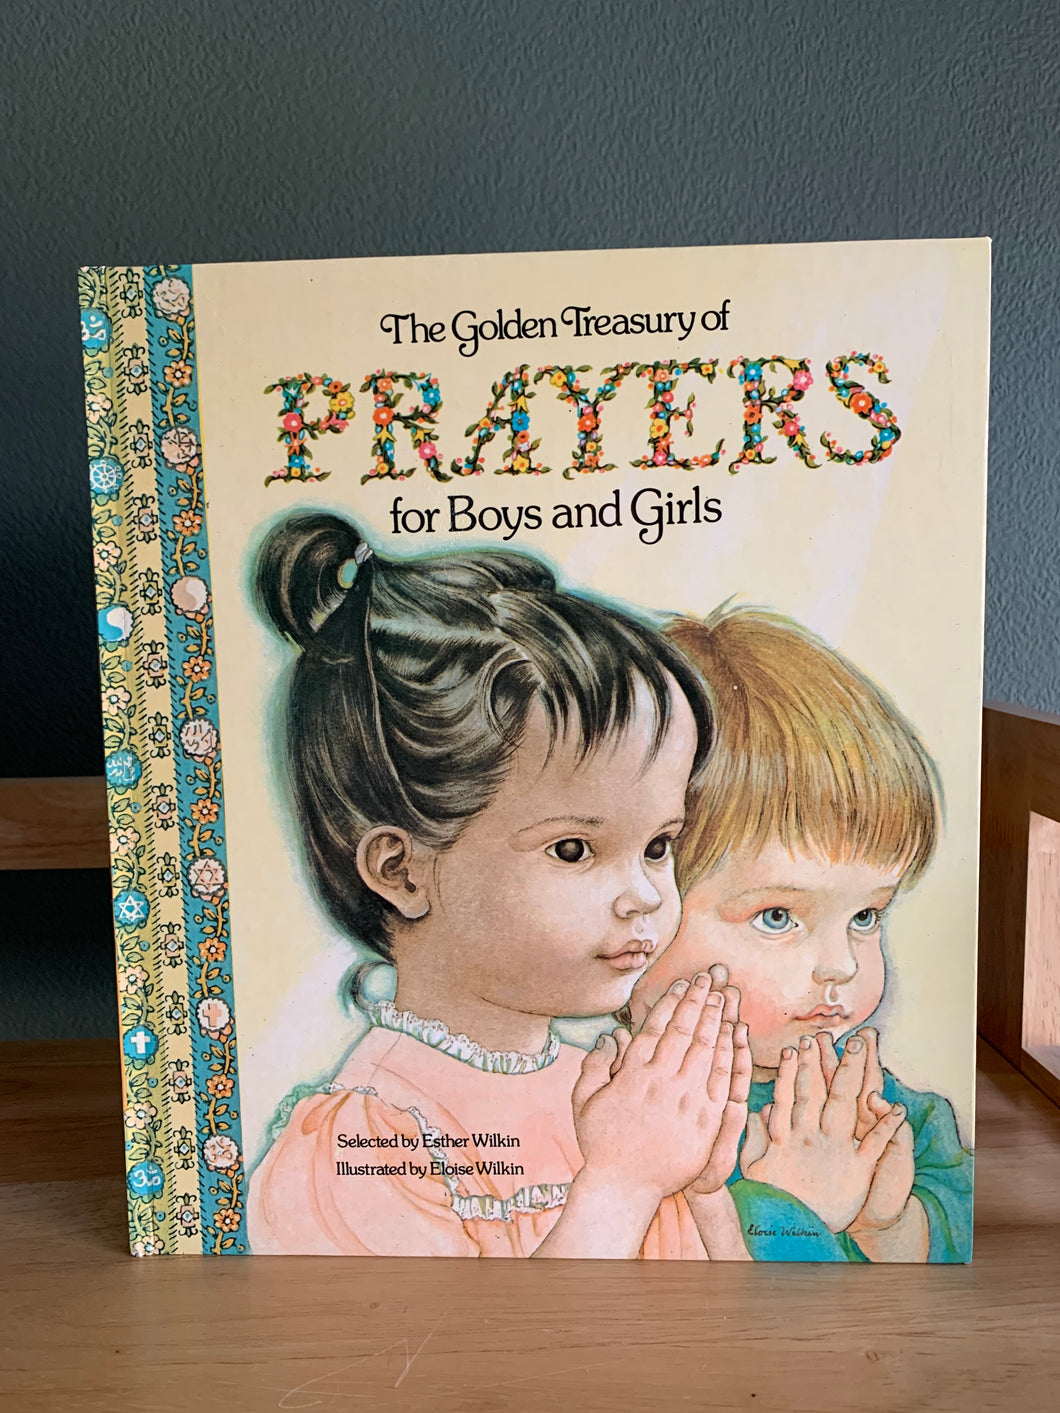 The Golden Treasury of Prayers for Boys and Girls